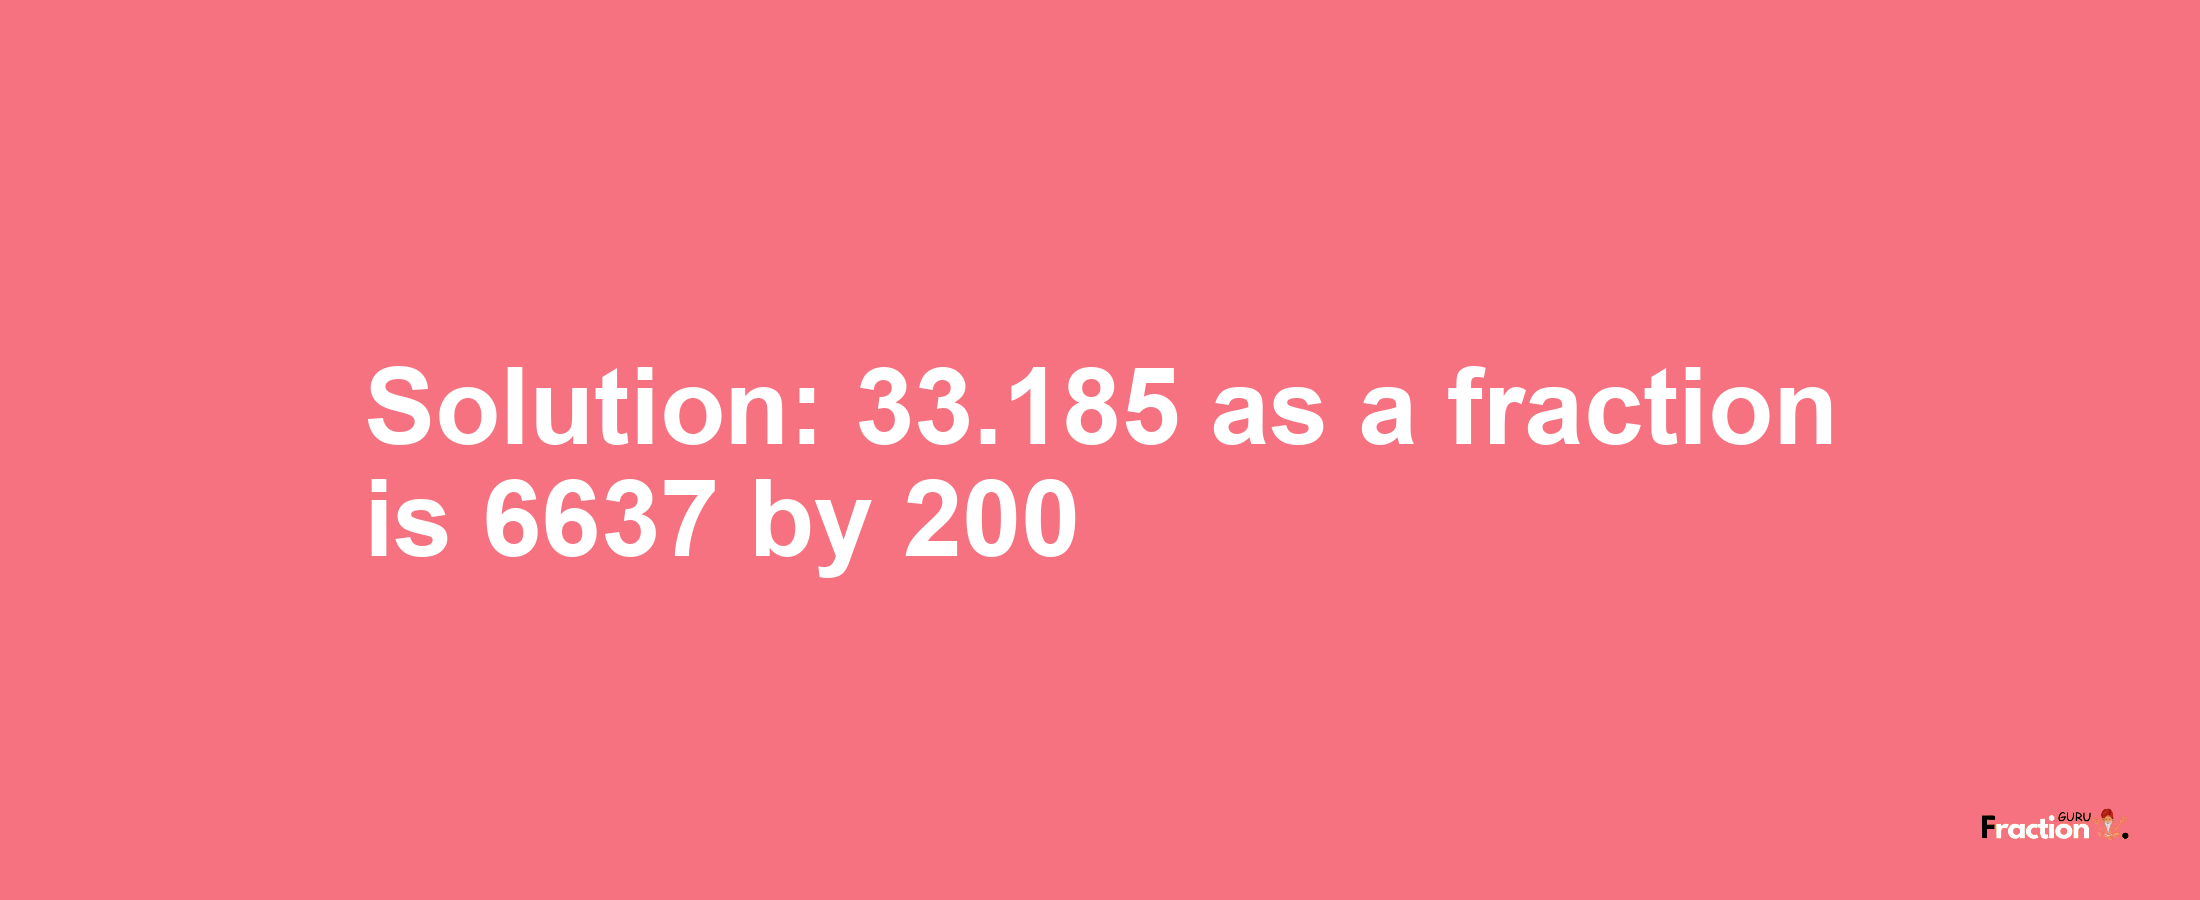 Solution:33.185 as a fraction is 6637/200